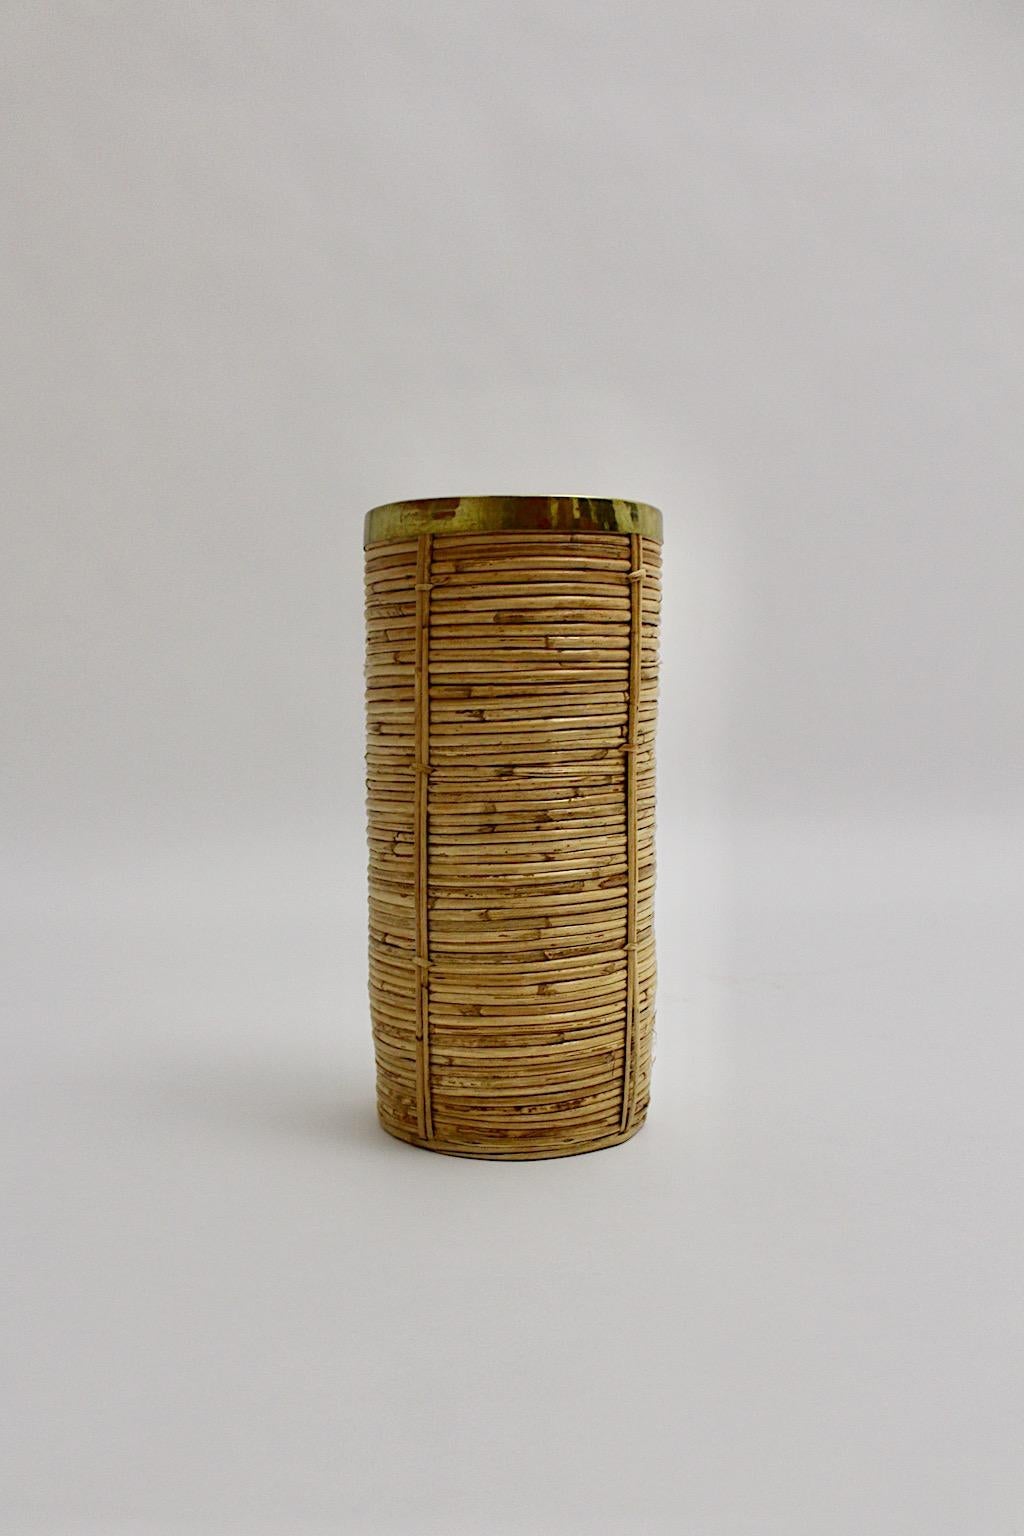 Riviera Style Organic Rattan Brass Paper Basket or Cane Holder, 1970s, Italy For Sale 3